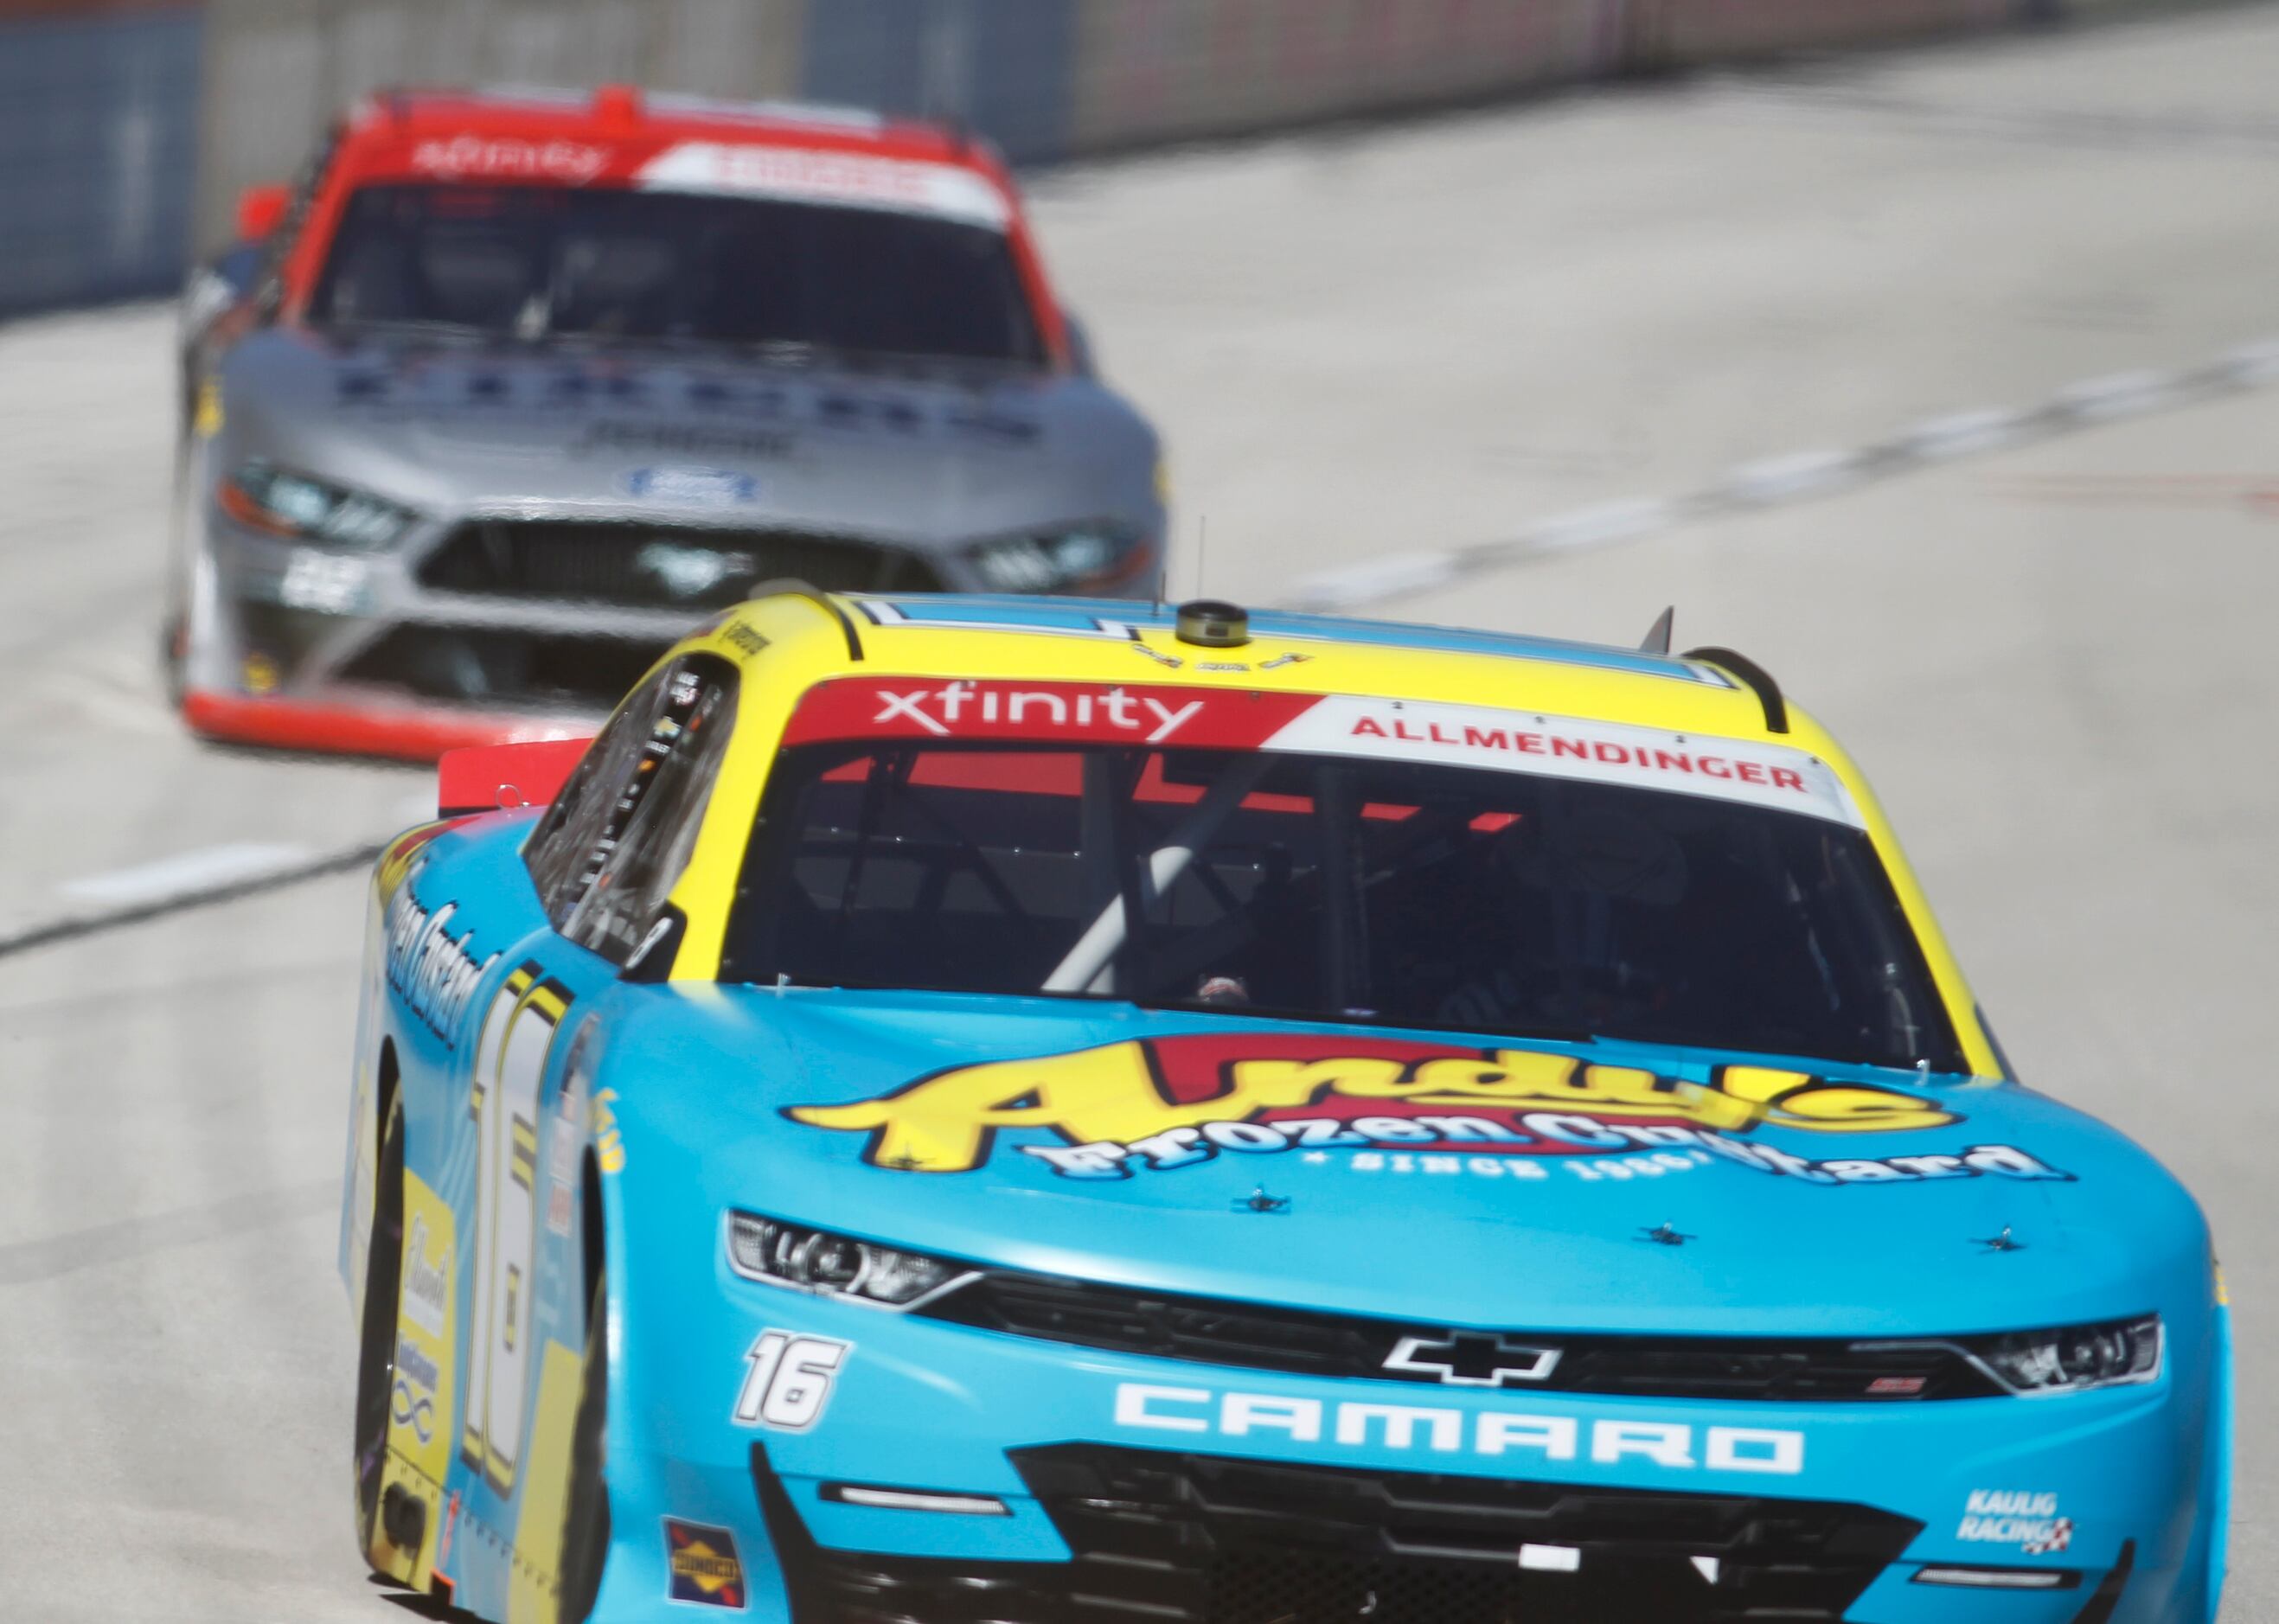 AJ Allmendinger set the pace as the leader from the pole position in the #16 car. The NASCAR...